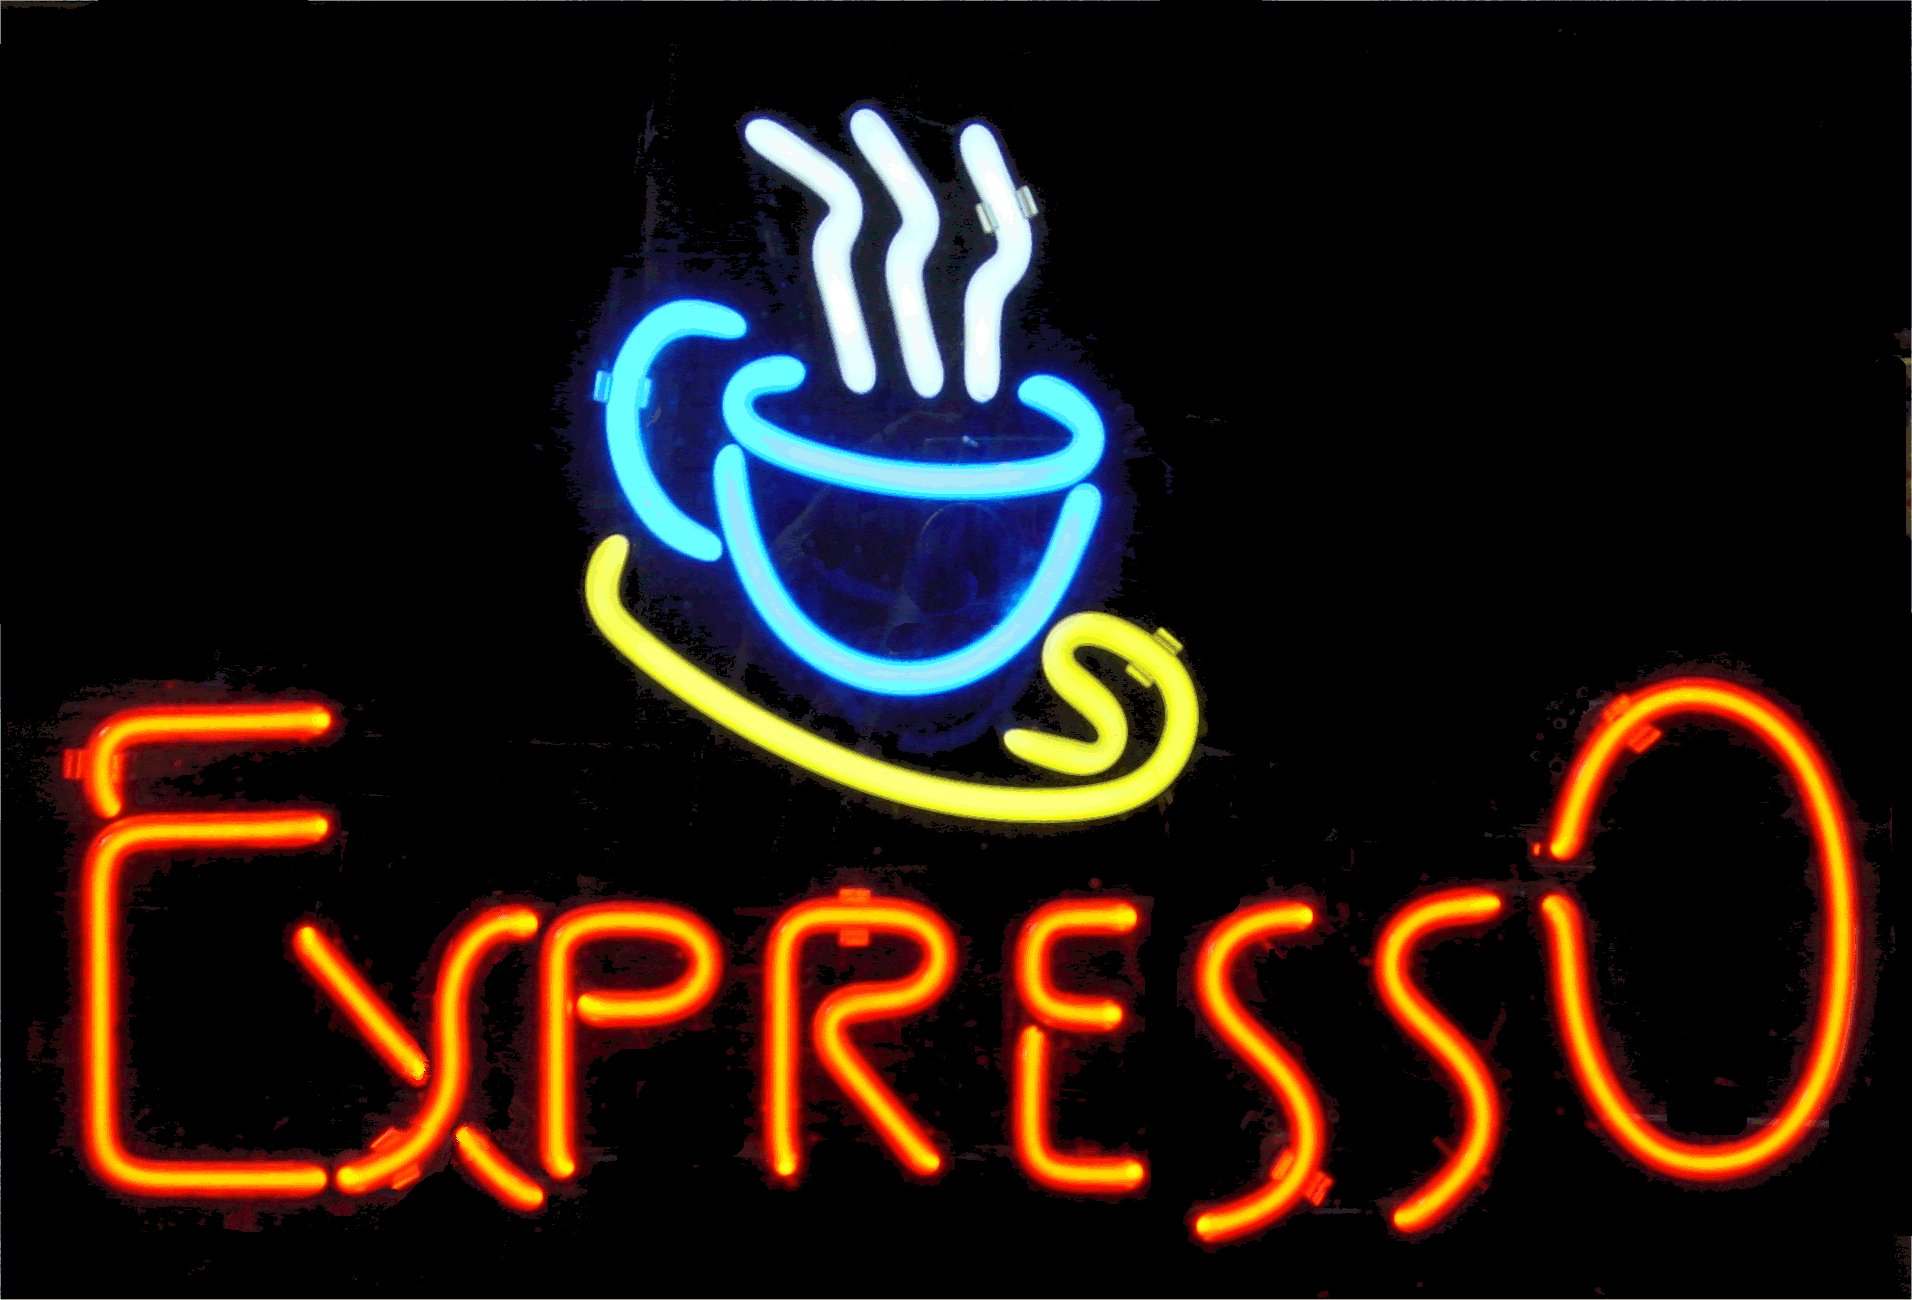 expresso t